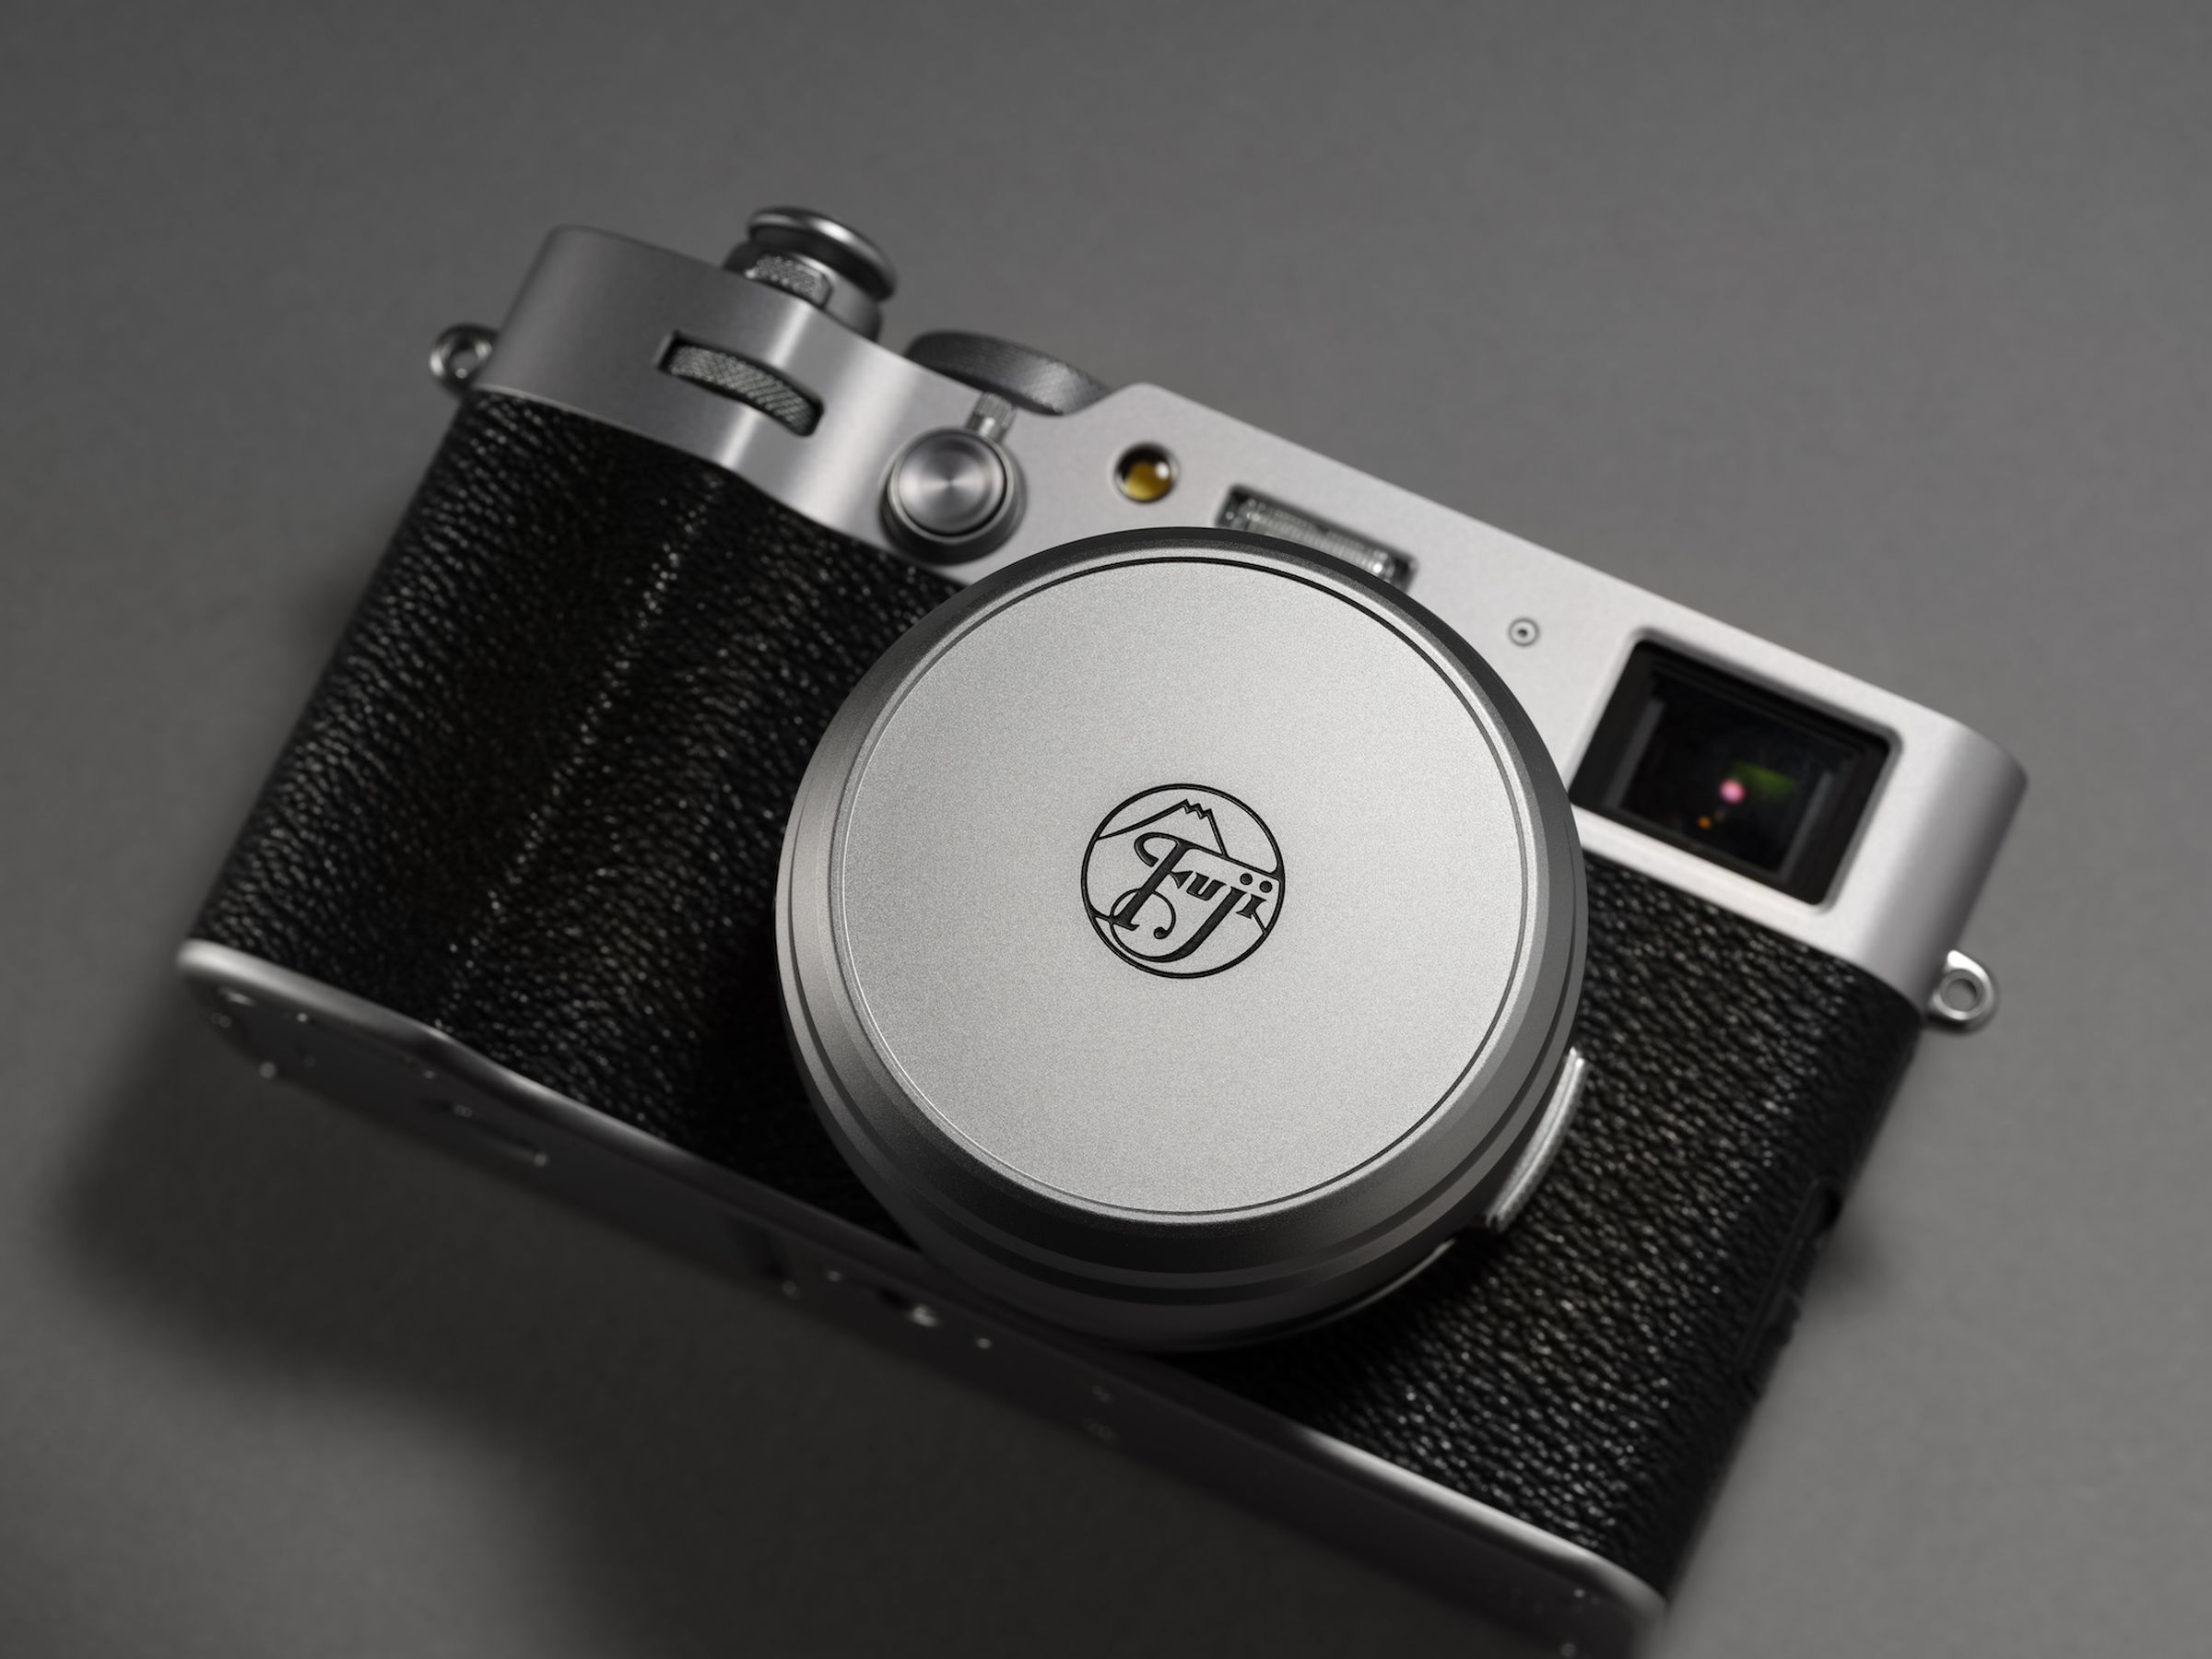 A marketing image of Fujifilm’s Limited Edition X100VI camera and exclusive accessories.